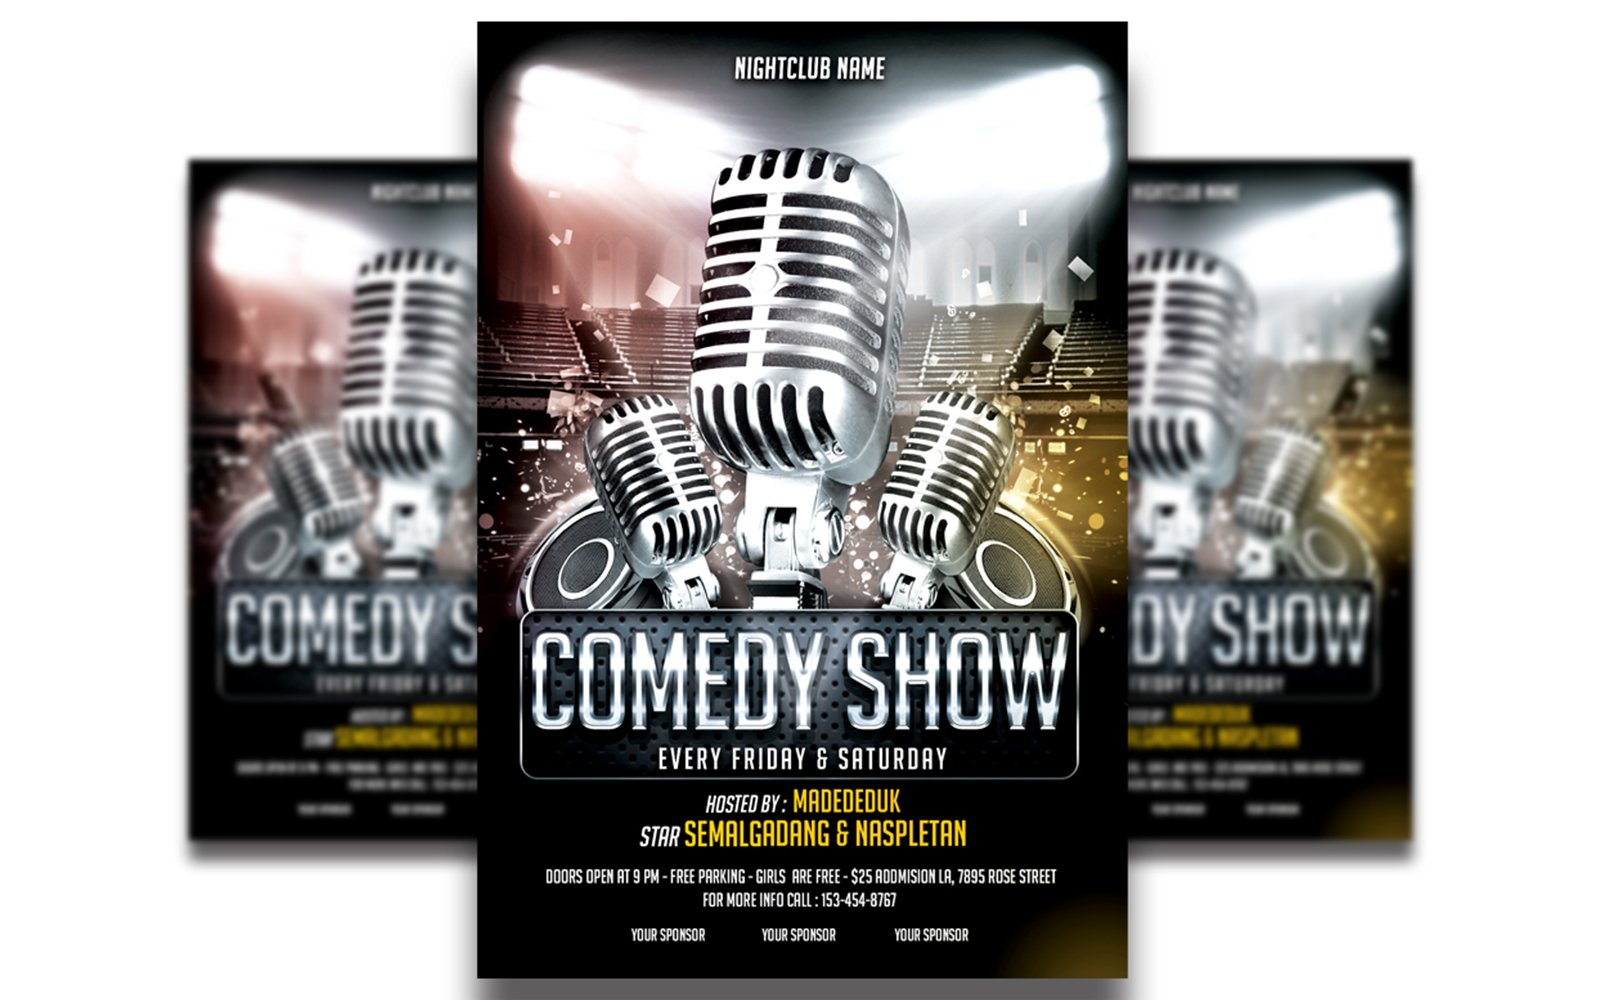 Comedy Show Flyer Template #2